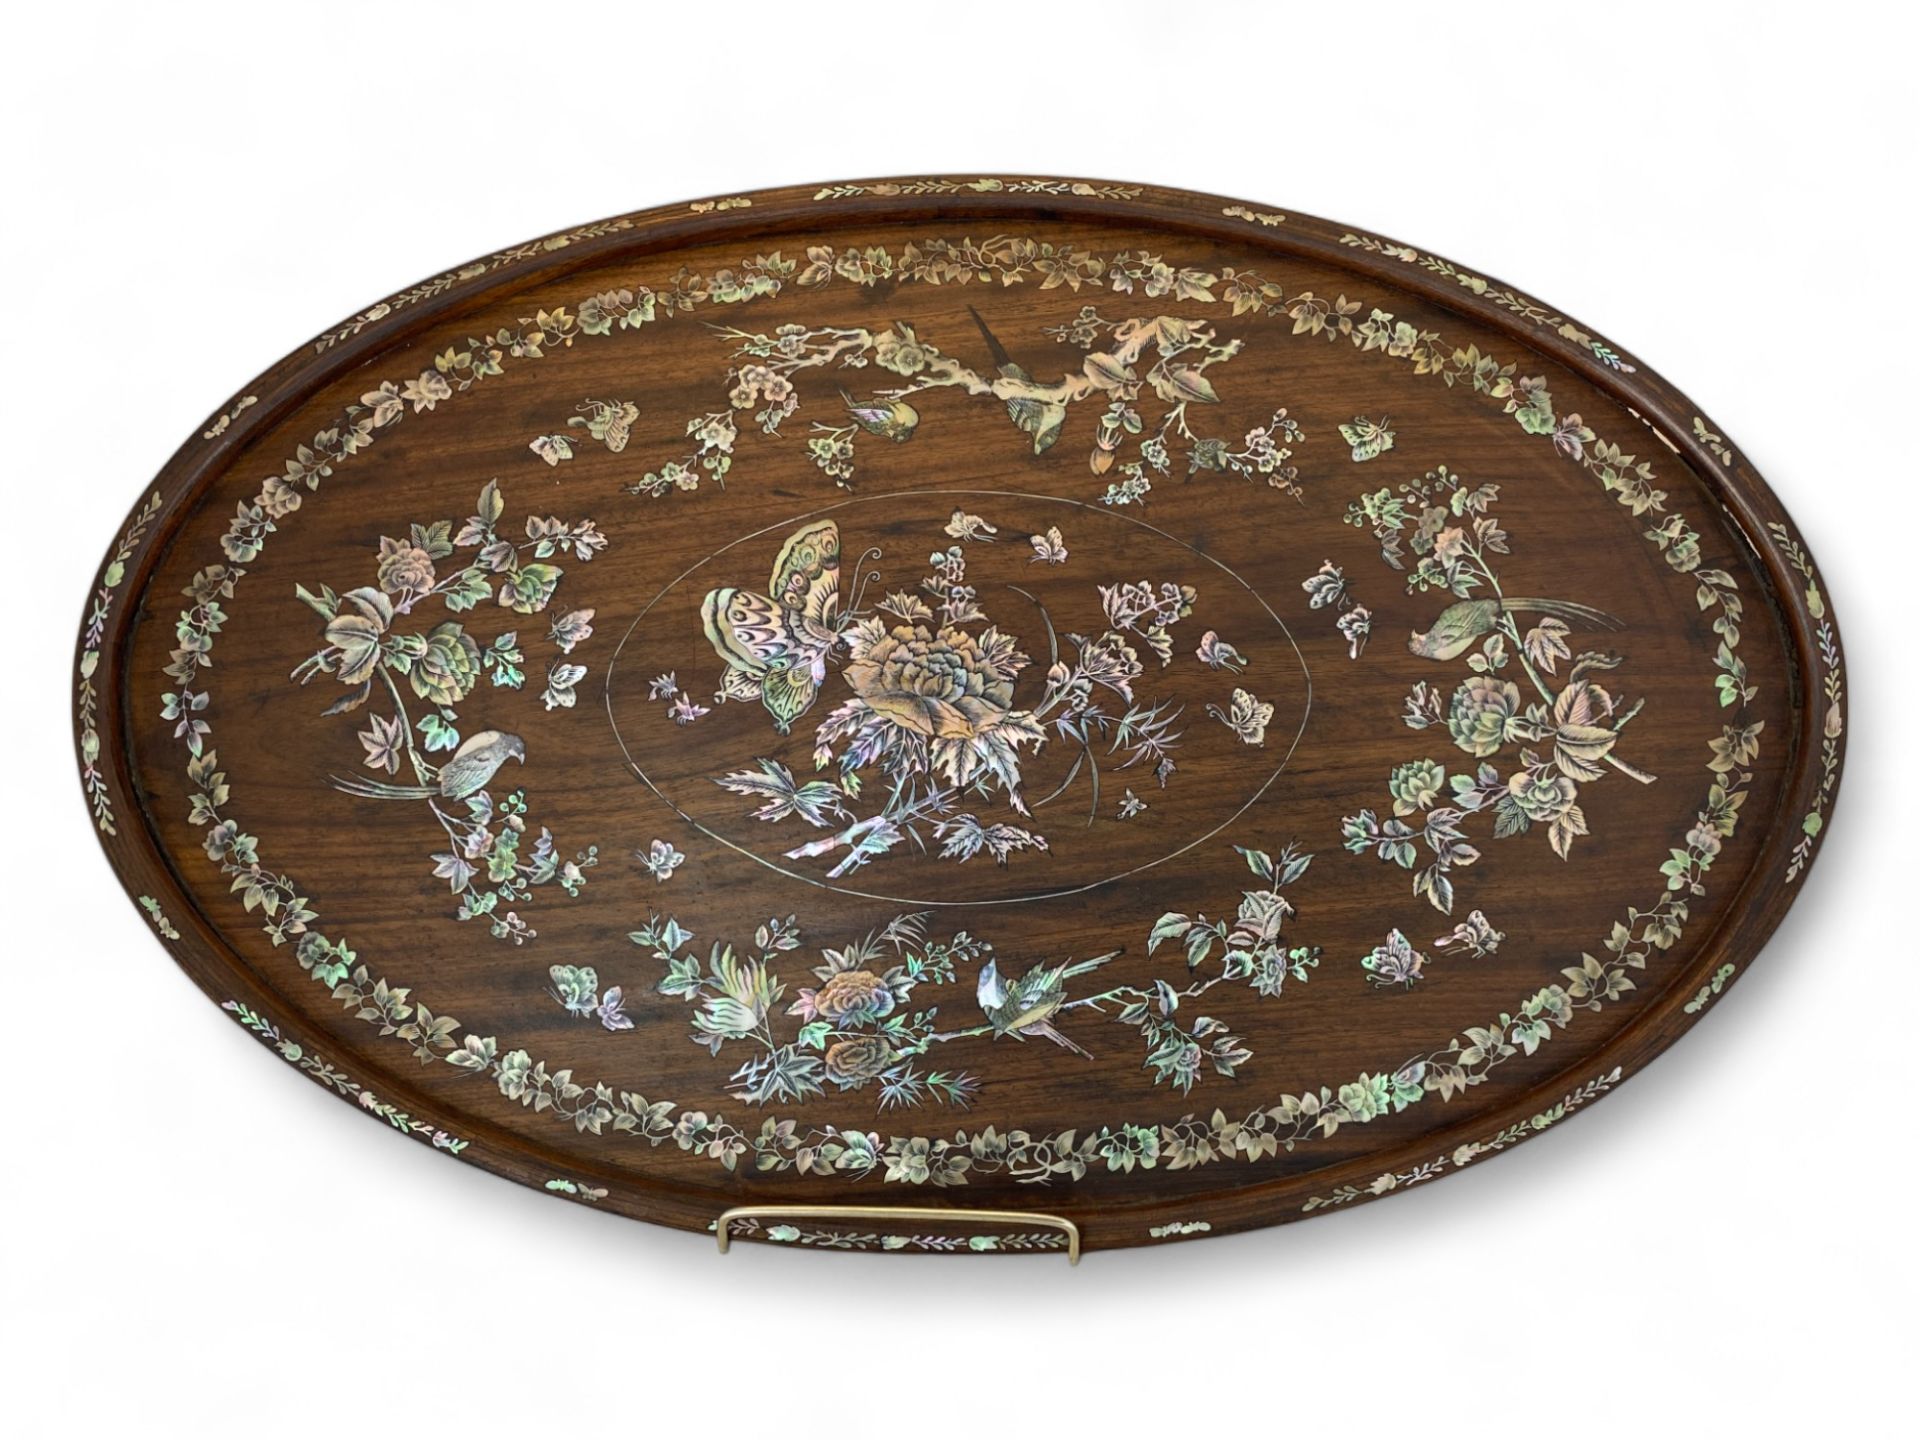 A late 19th century Chinese mother-of-pearl inlaid hardwood oval tray